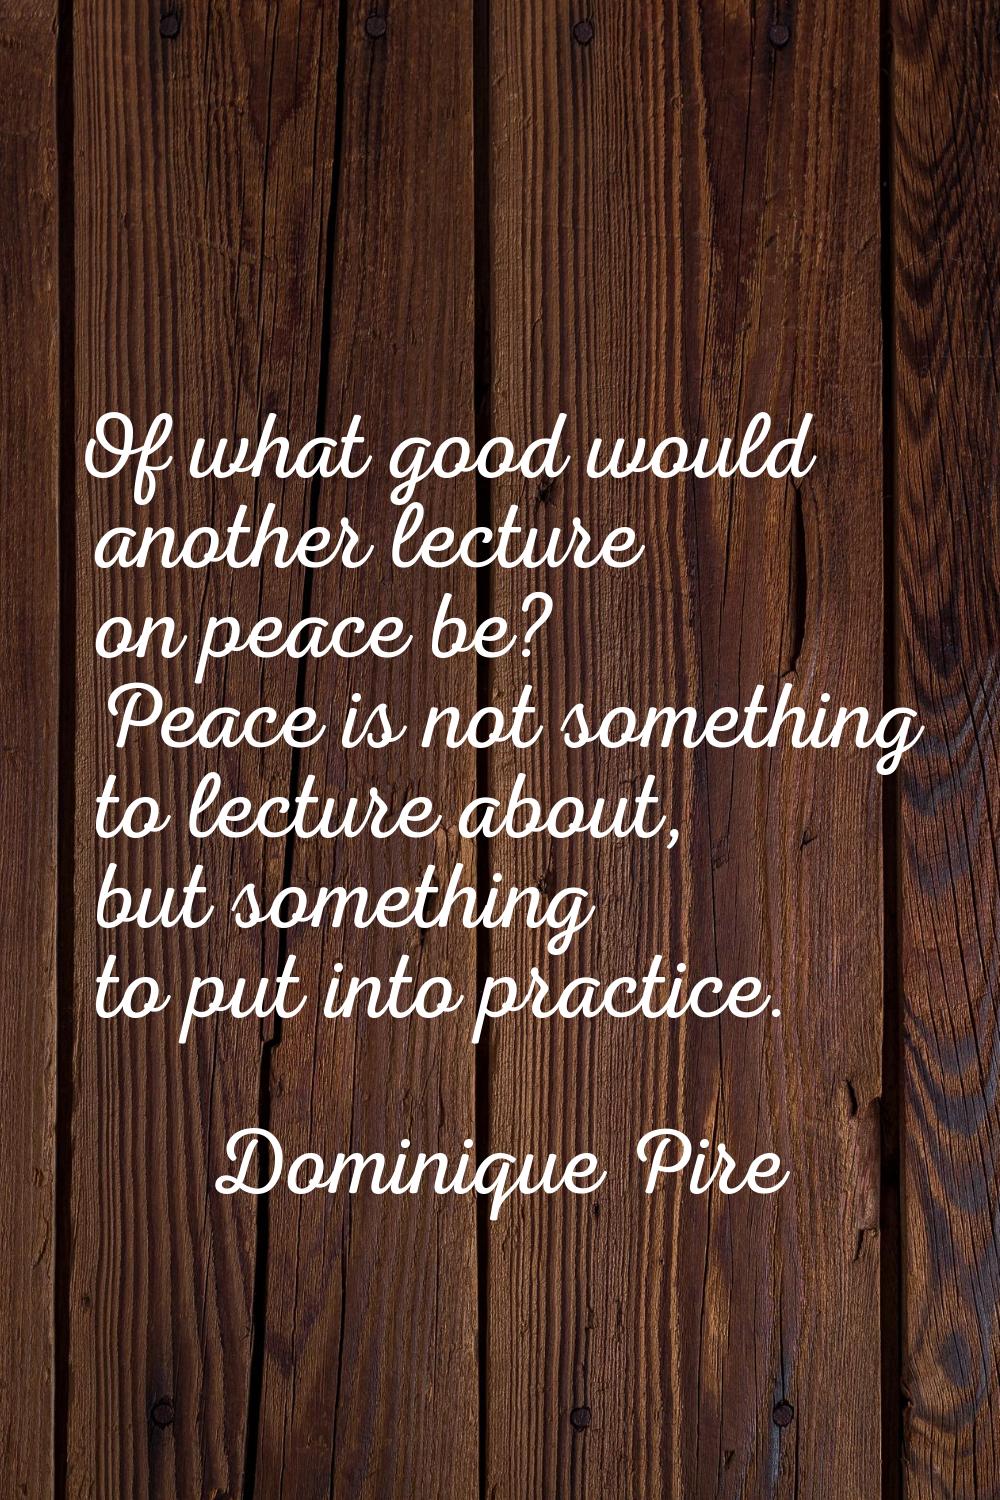 Of what good would another lecture on peace be? Peace is not something to lecture about, but someth